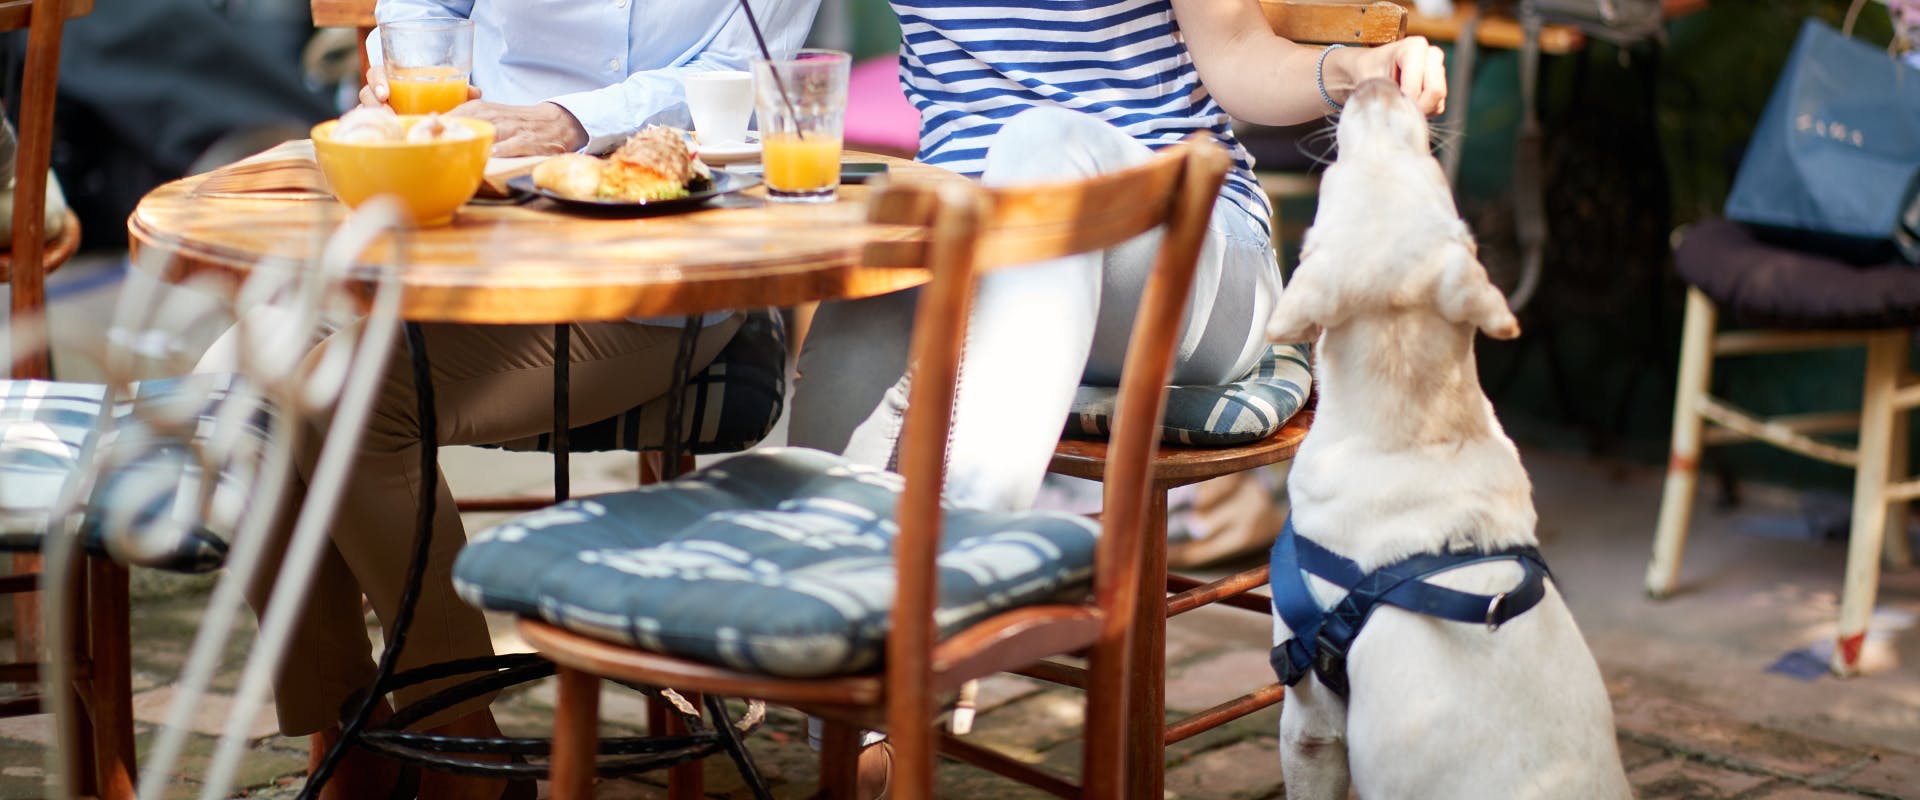 A dog nibbles something out of someone's hand on the patio of a restaurant.